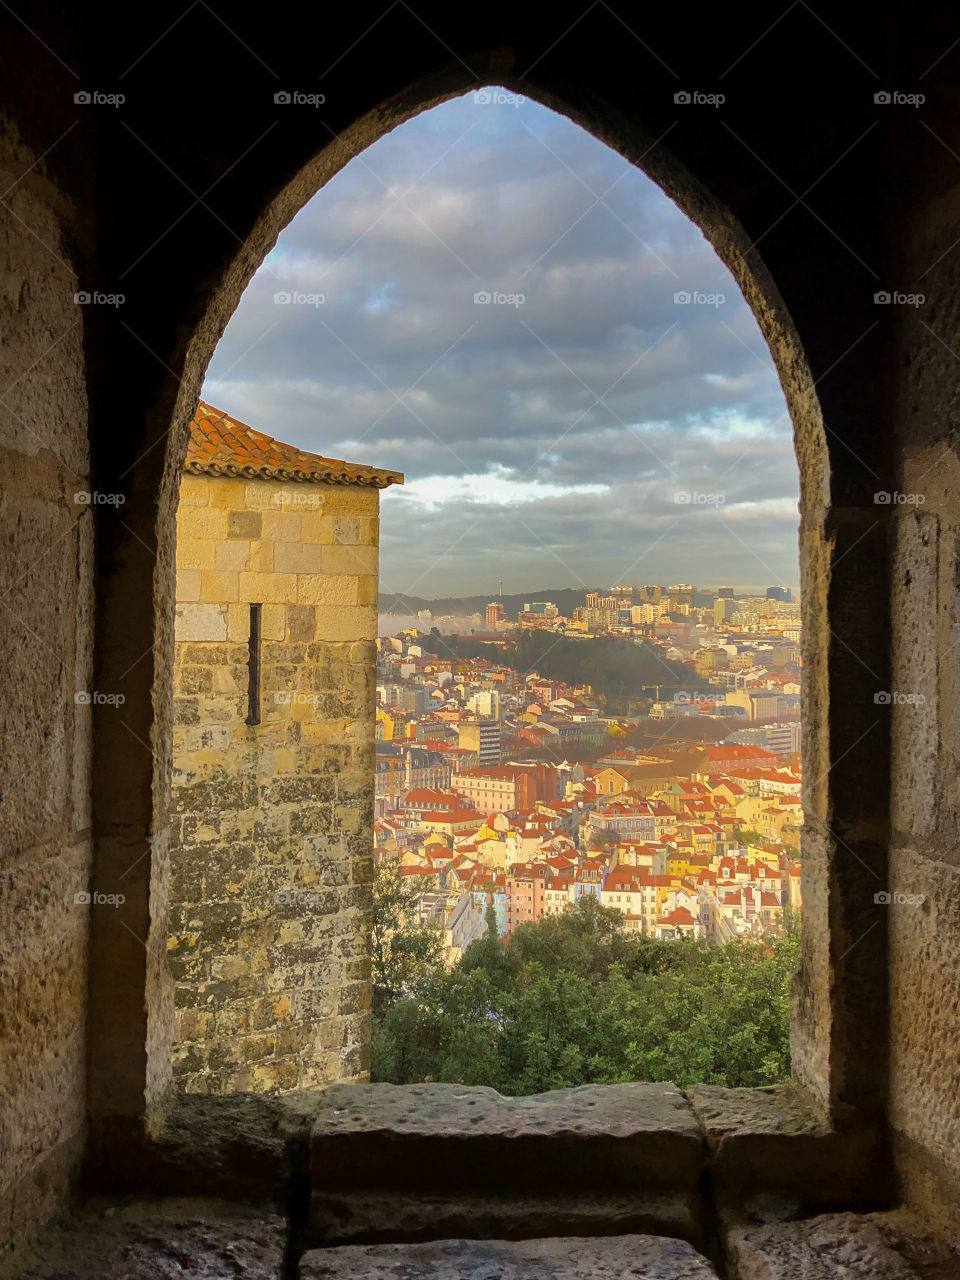 The city of Lisbon is perfectly framed within a window of a castle tower atop a hill